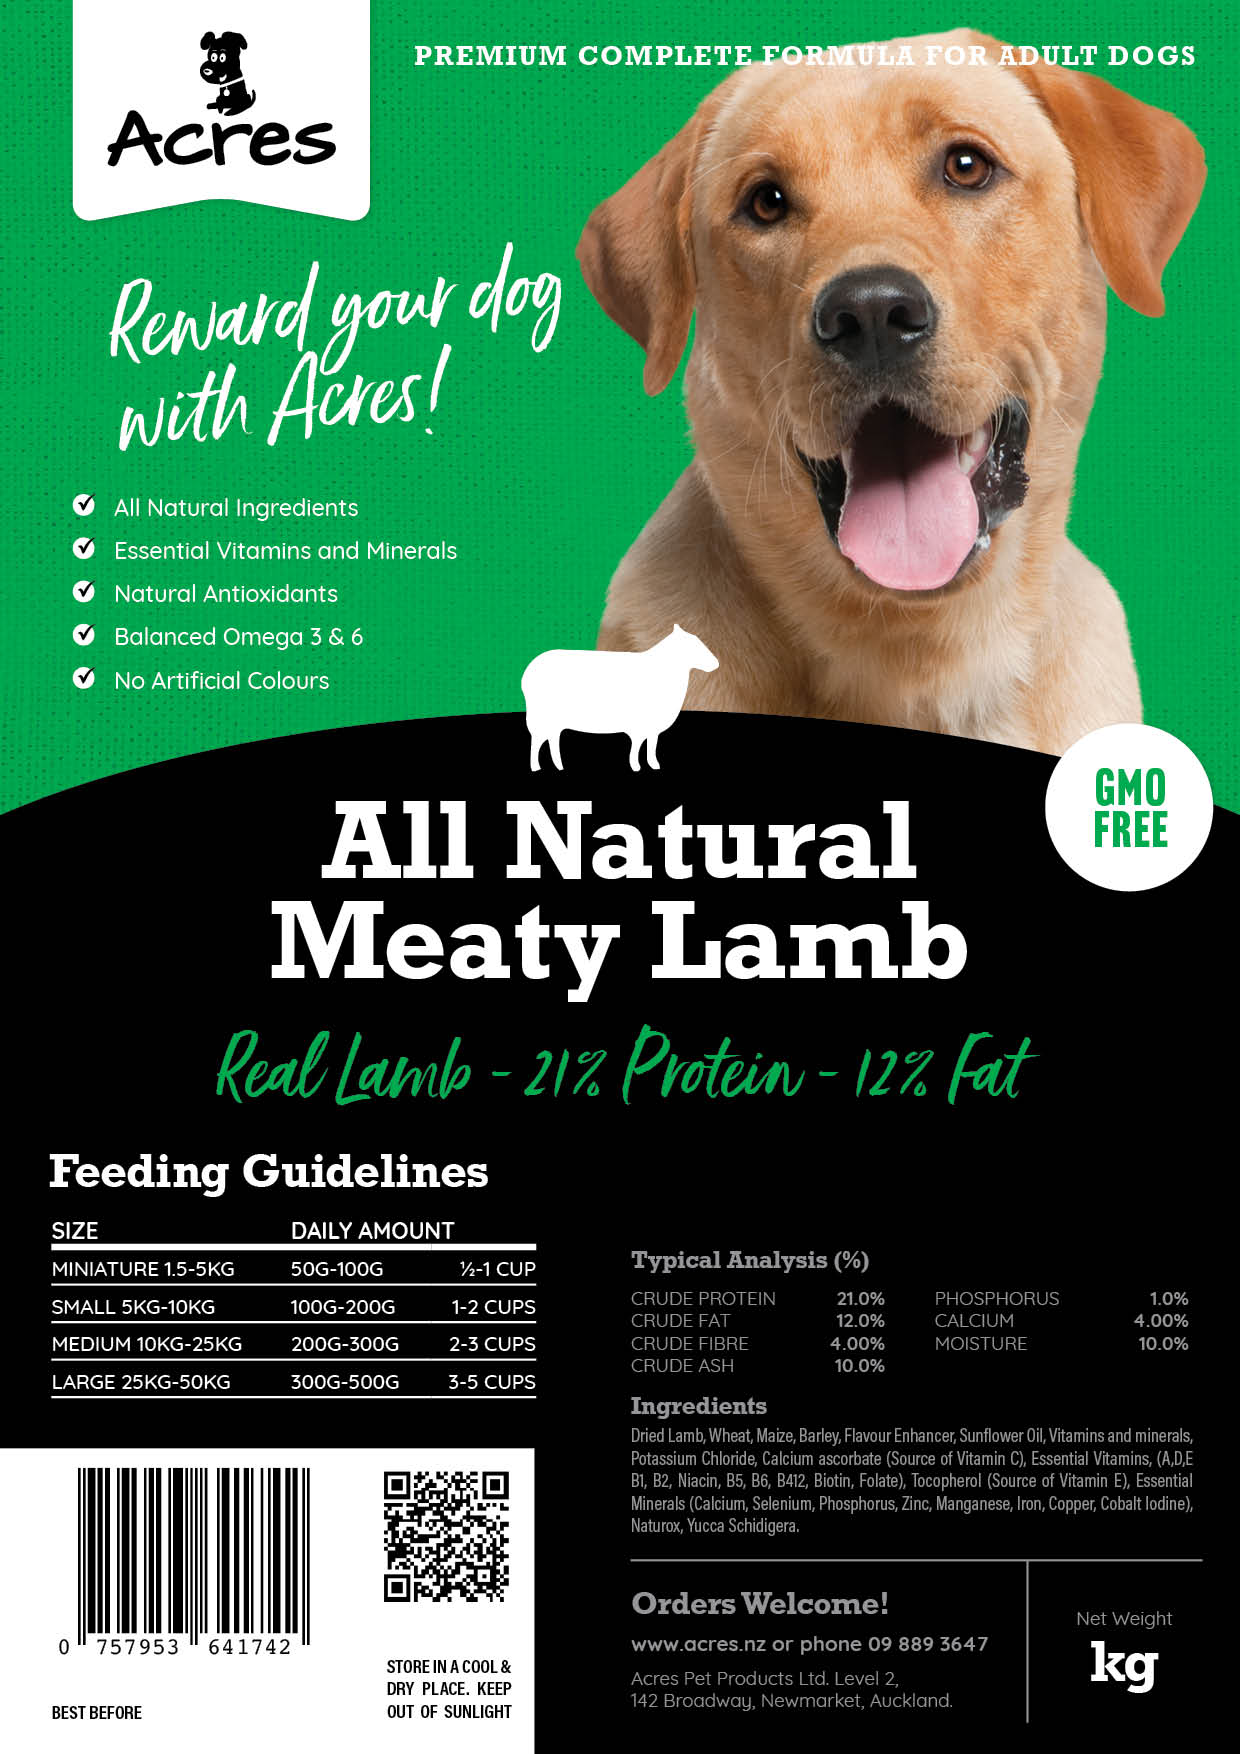 Acres: All Natural Meaty Lamb Dog Food